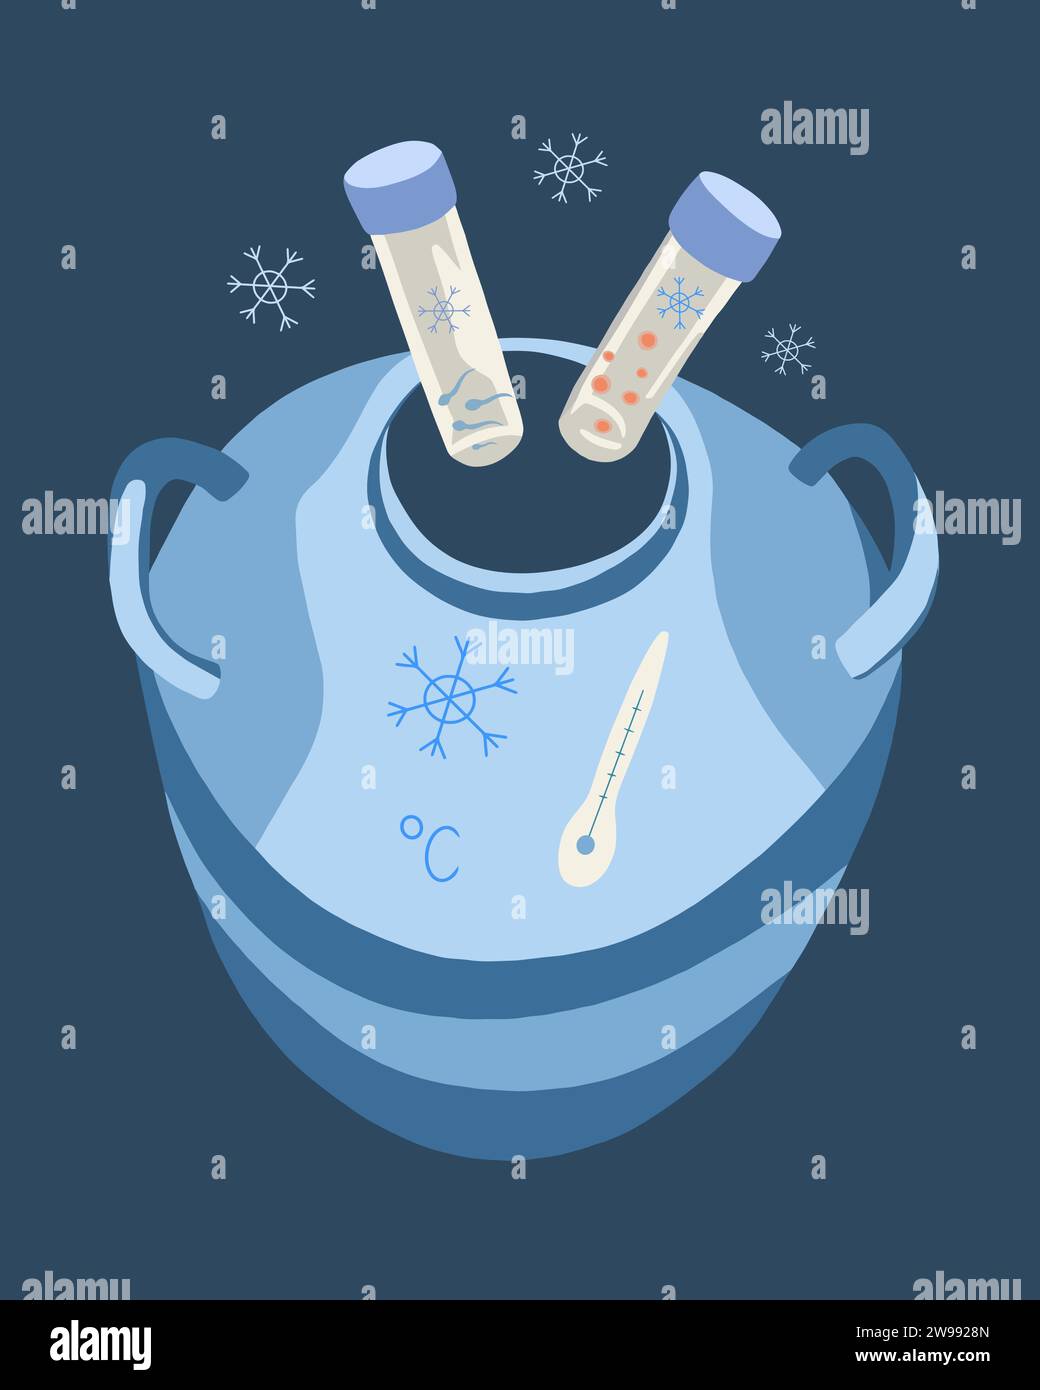 Vector isolated illustration of cryopreservation of eggs and sperm. Egg donation. Sperm donation. Artificial insemination. Cryobiology. Stock Vector